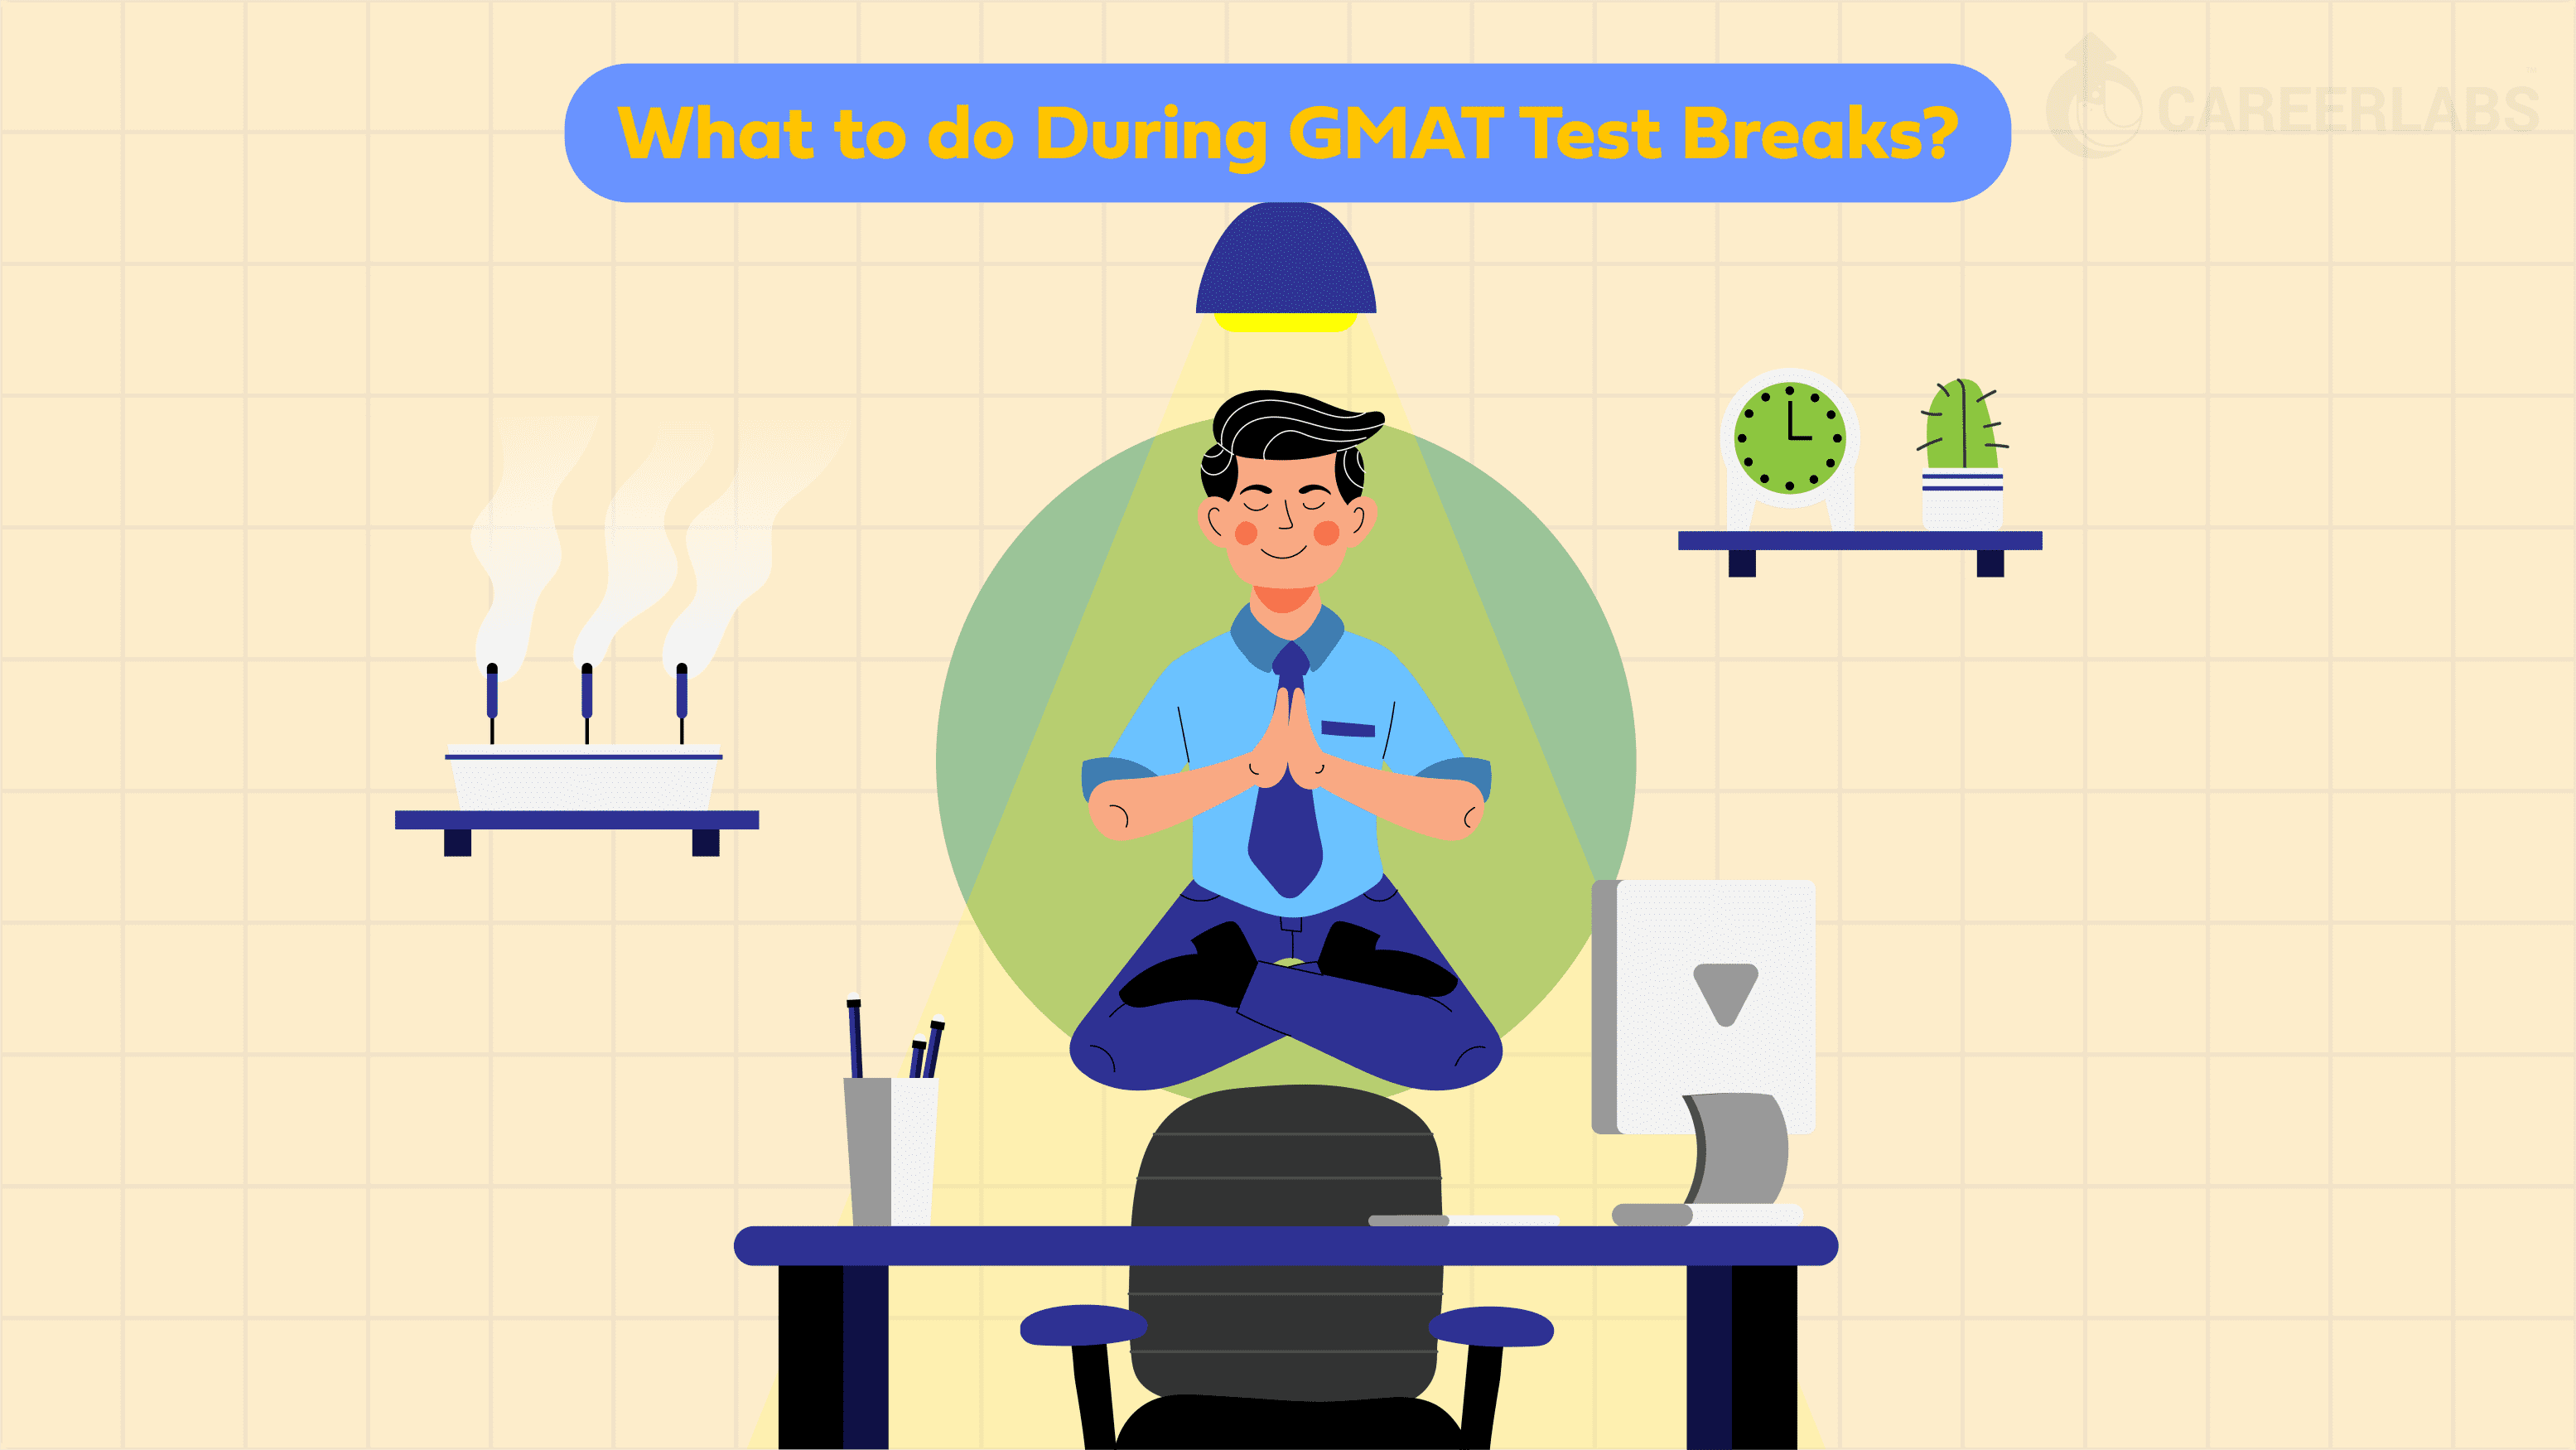 What to do During GMAT Test Breaks?